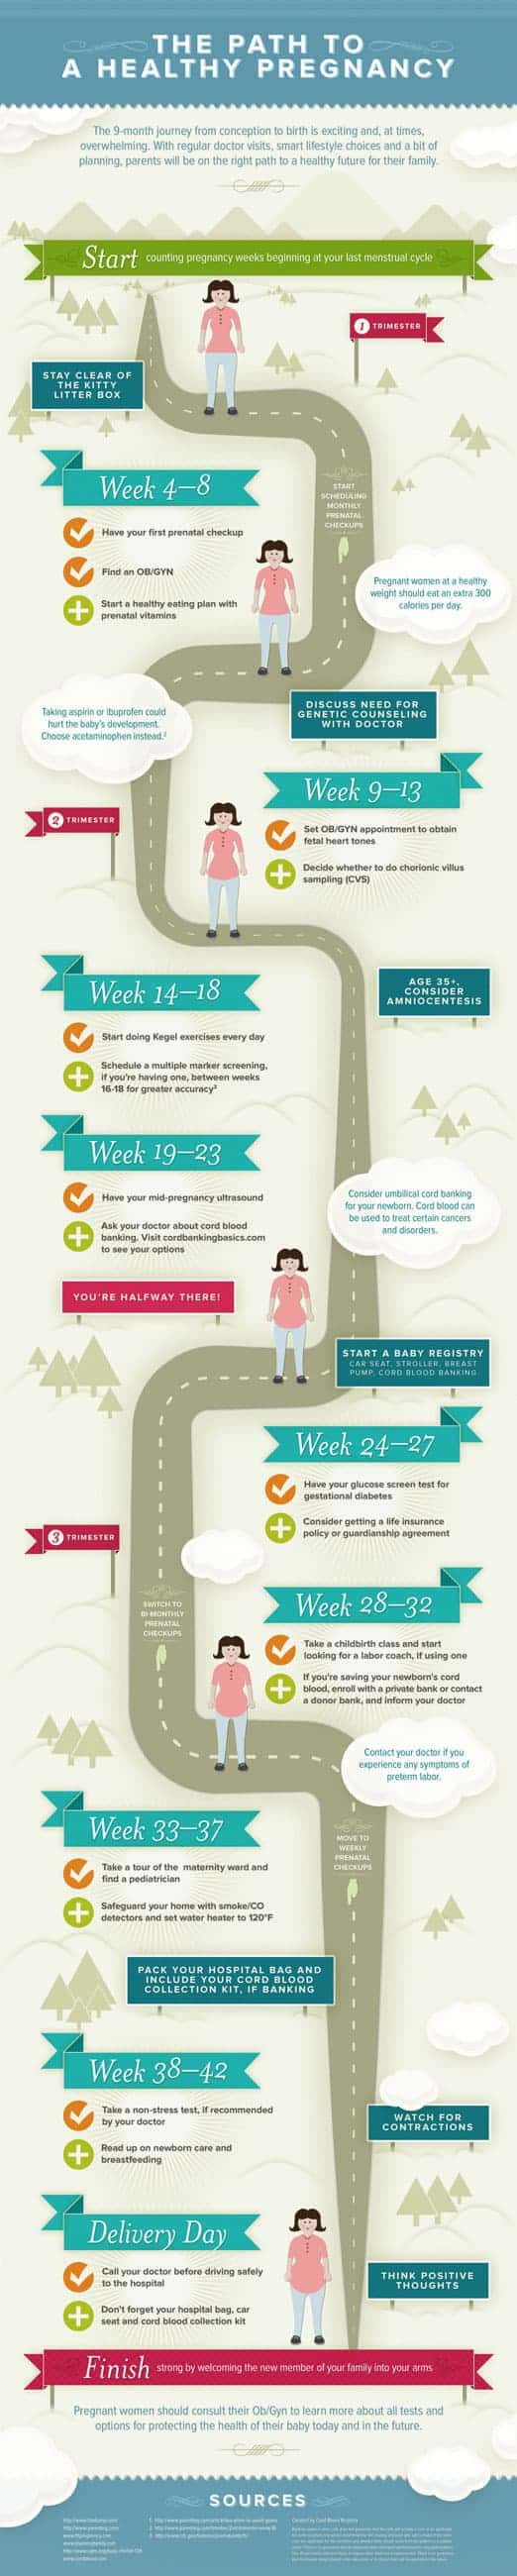 Path To A Healthy Pregnancy